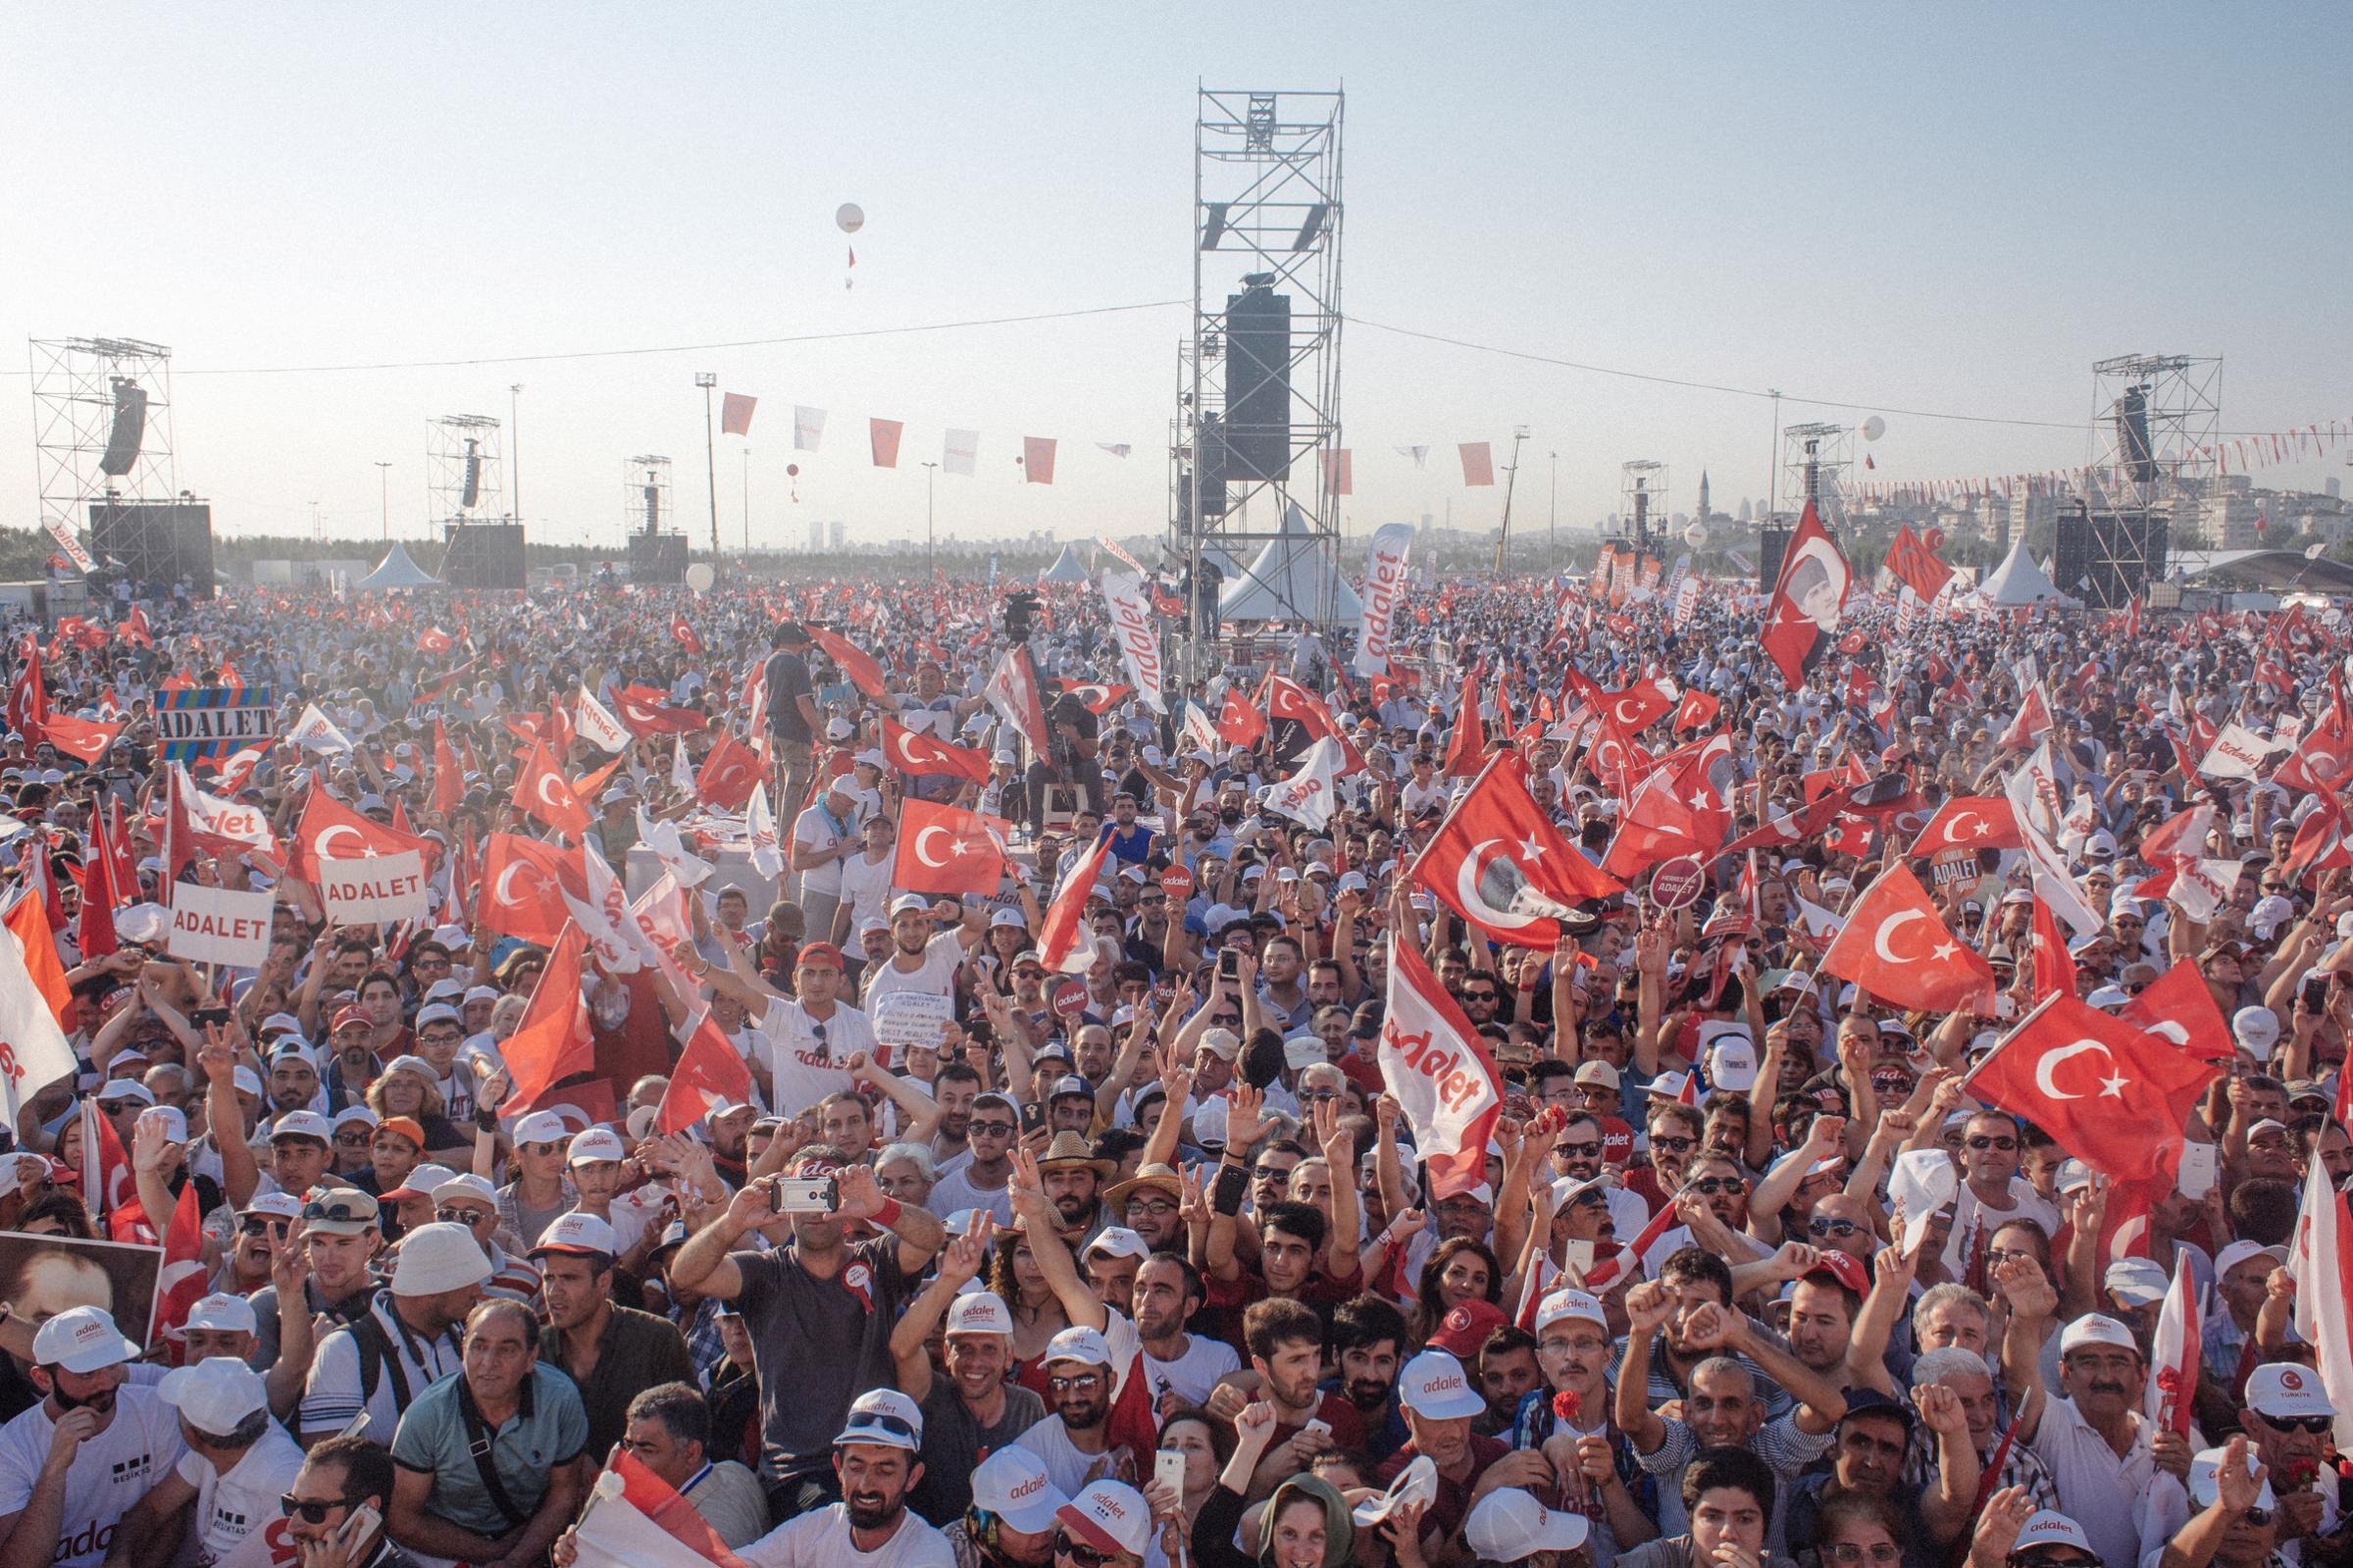 A massive crowd listens as the leader of Turkey’s mainstream opposition, Kemal Kilicdaroglu, issued a thunderous demand in Istanbul on July 9, 2017, for an end to an ongoing government crackdown under President Recep Tayyip Erdogan.